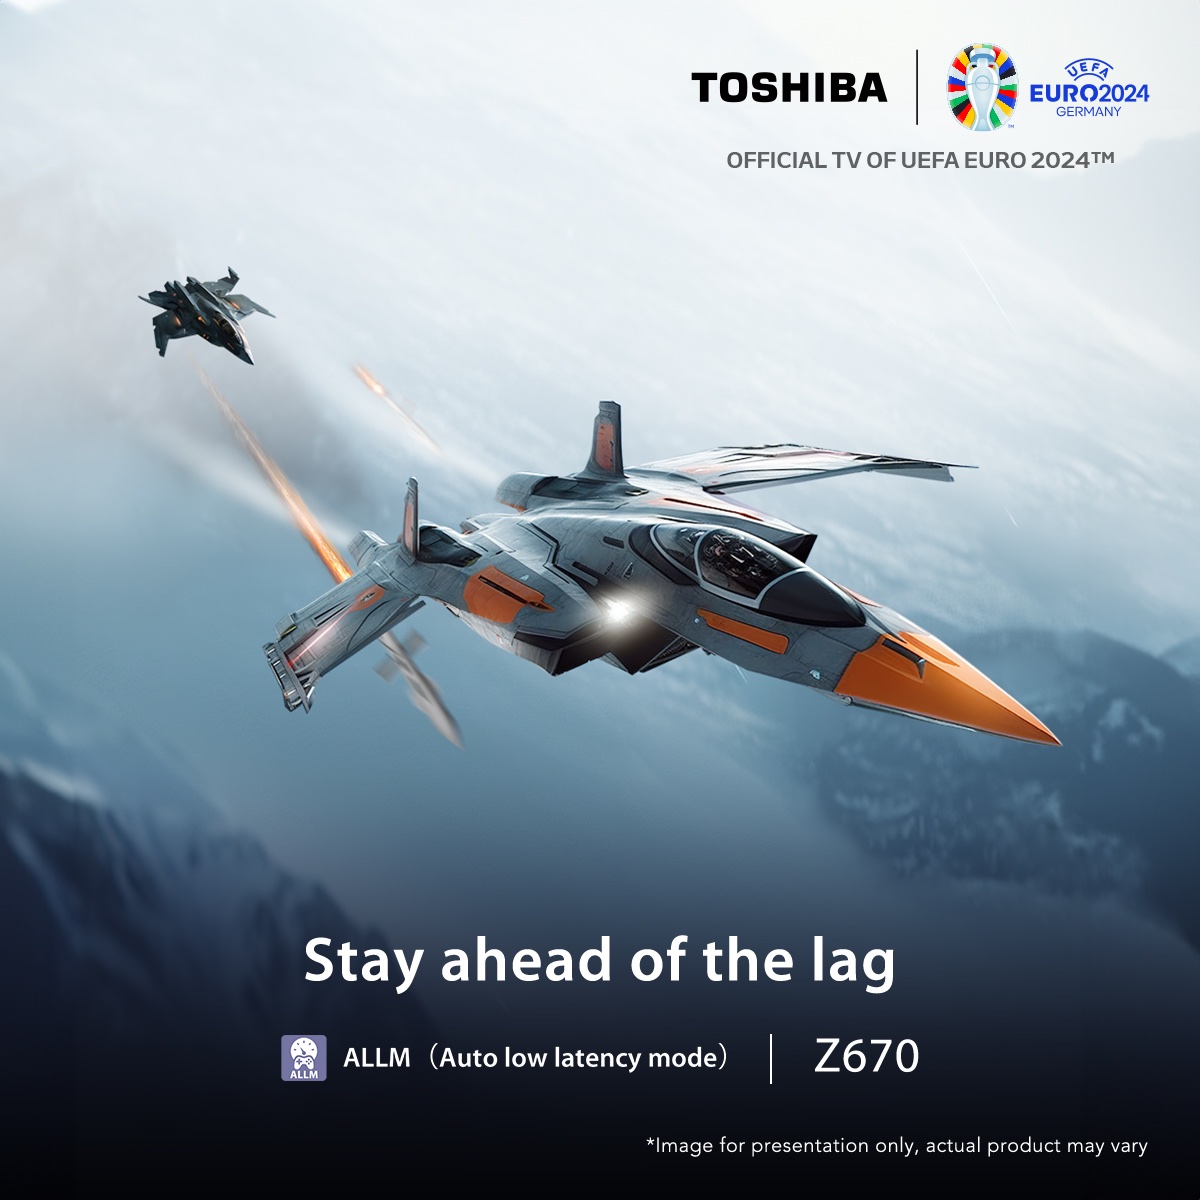 Fly into smooth skies and escape laggy nosedives with the #ToshibaTV Z670 Auto Low Latency Mode.Enjoy lightning-fast reactions and seamless maneuvers. What game tests your reflexes the most? Share in the comments.
#BeRealCraftsmanship